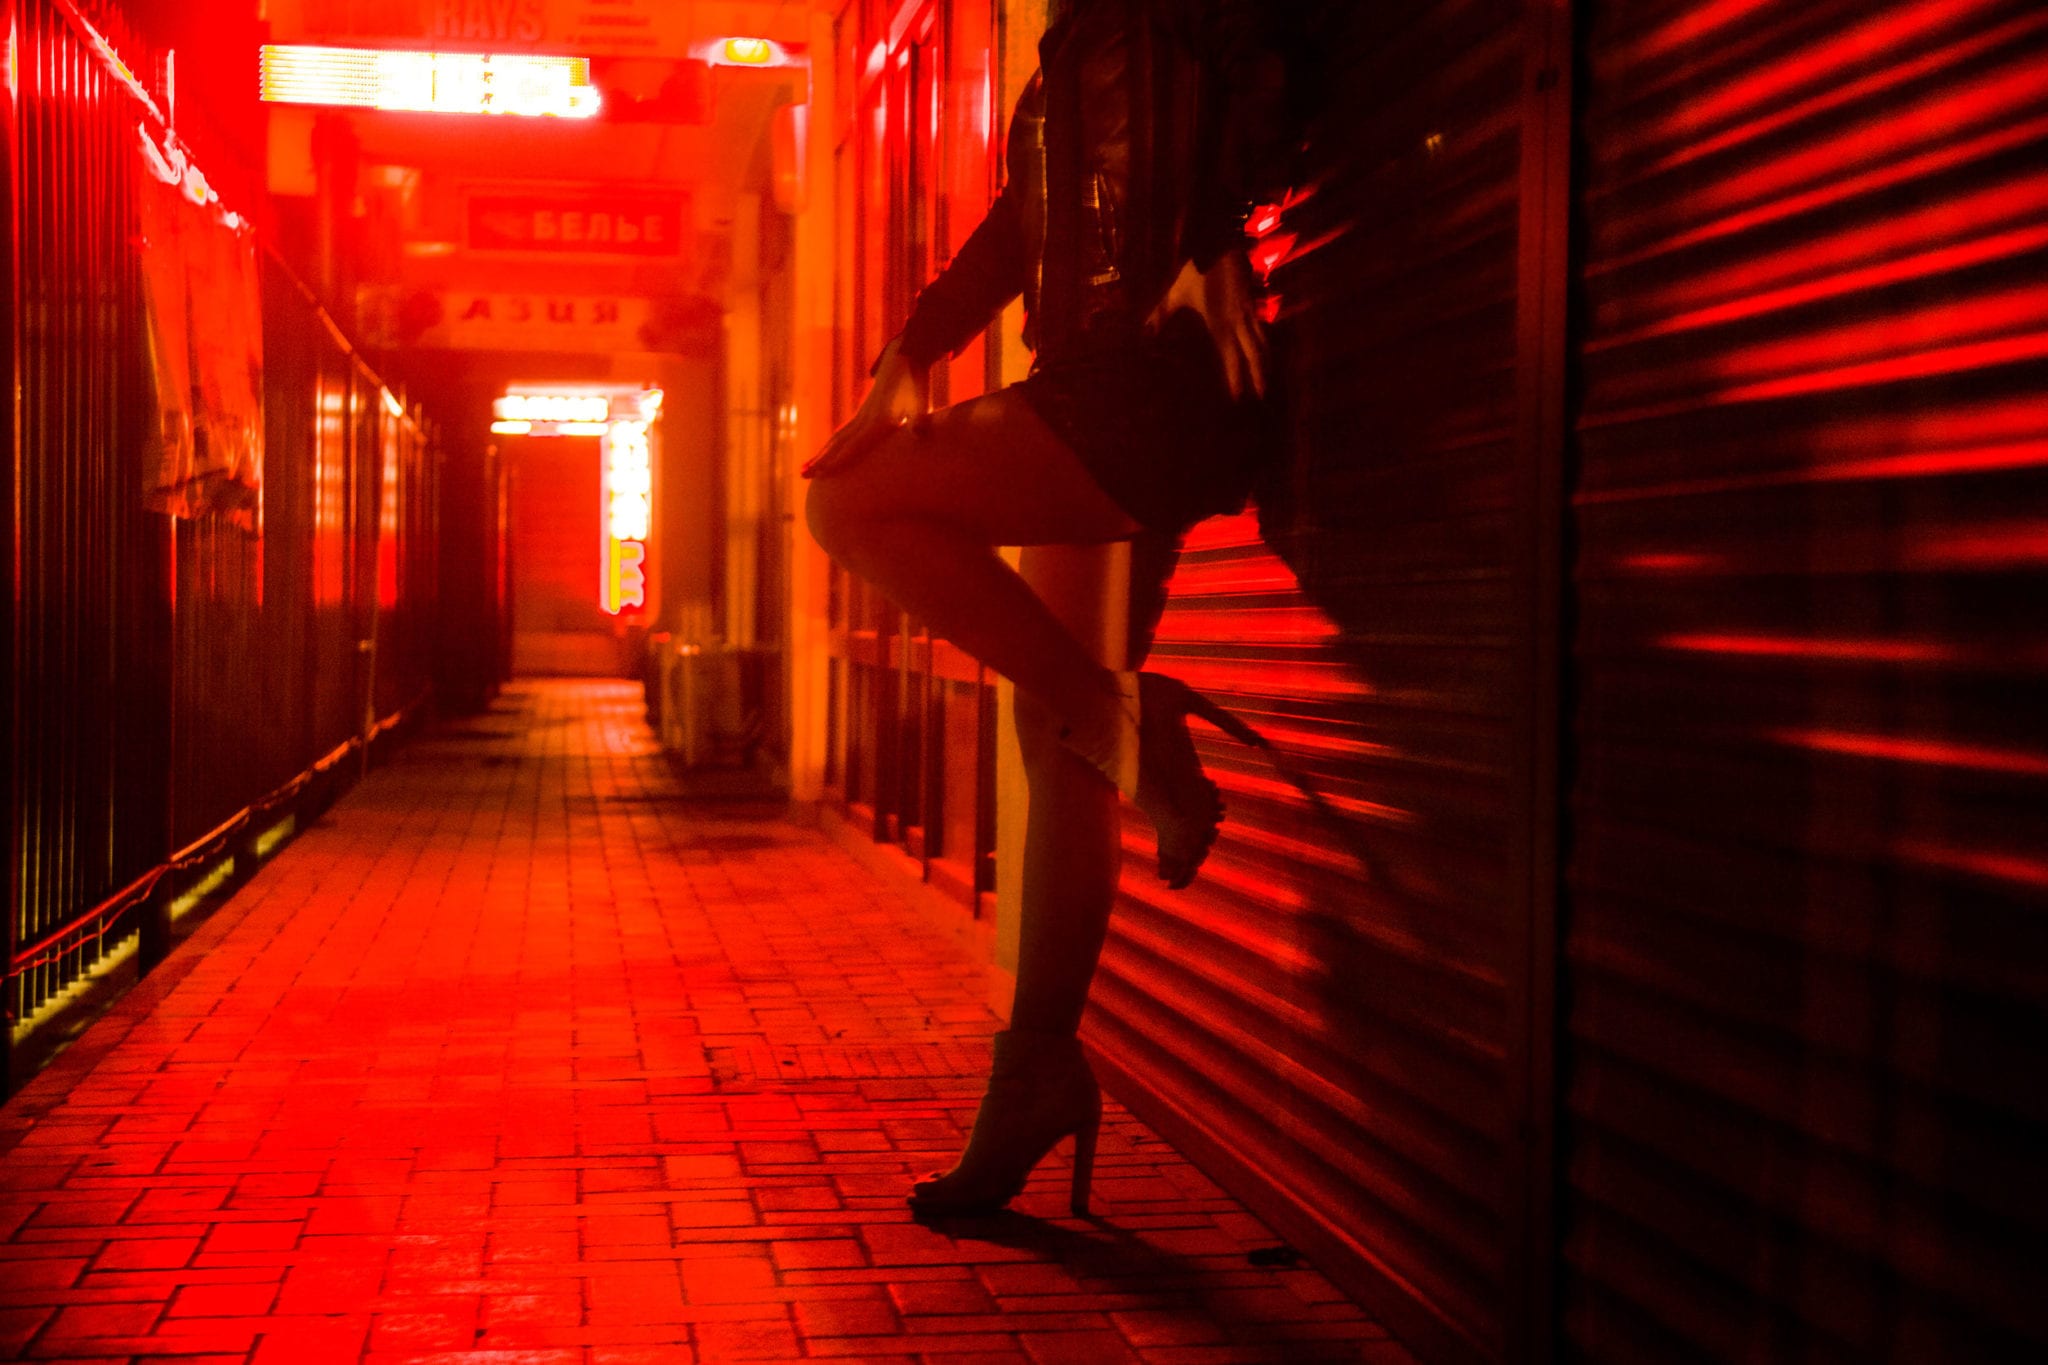 North Carolina Prostitution Offenses and Penalties